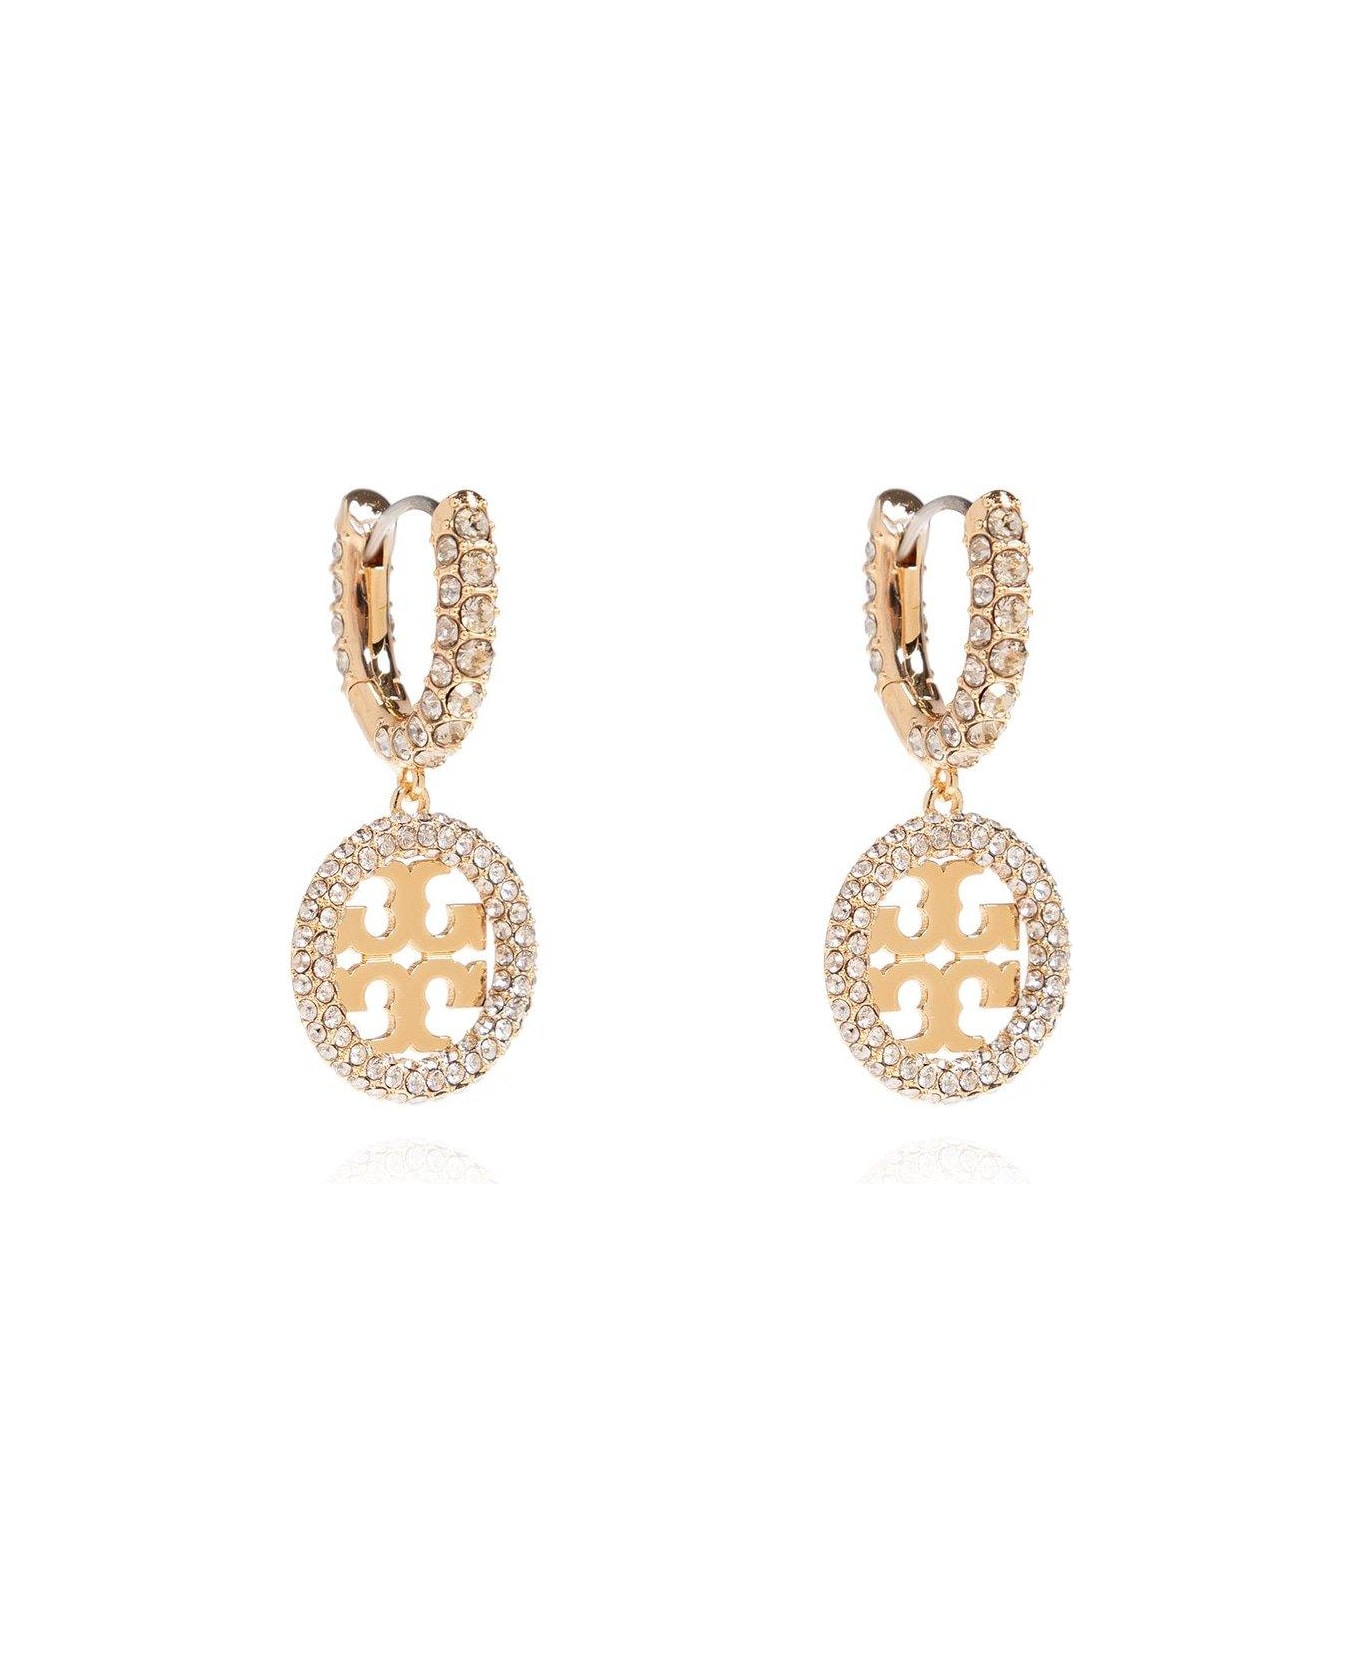 Tory Burch Crystal Embellished Earrings - Gold/crystal